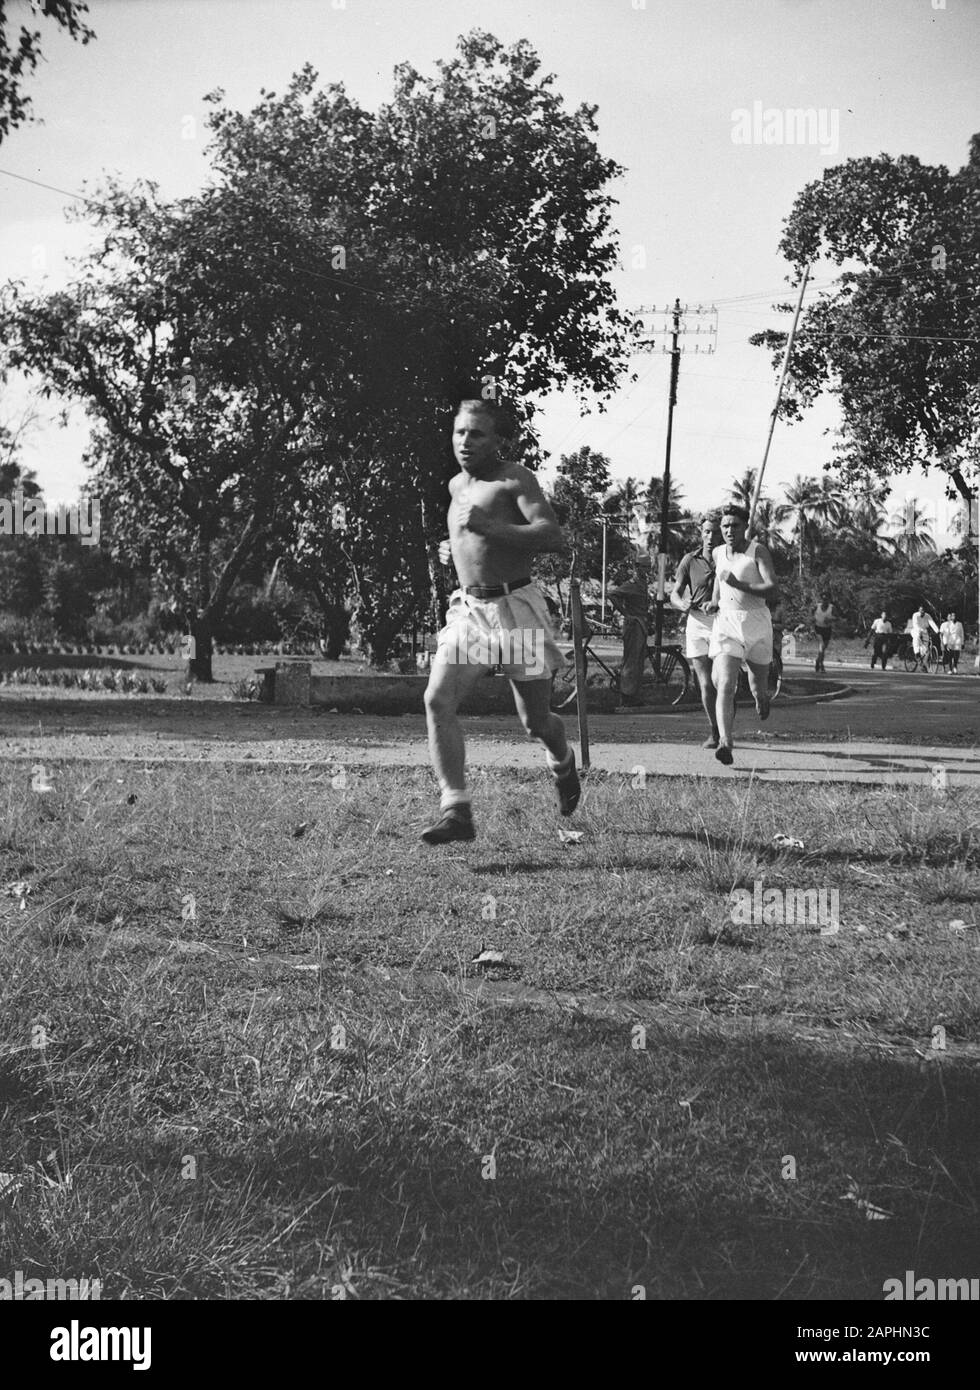 City run in Padang Description: The runners on the road Date: 9 May 1948 Location: Indonesia, Dutch East Indies, Padang, Sumatra Stock Photo